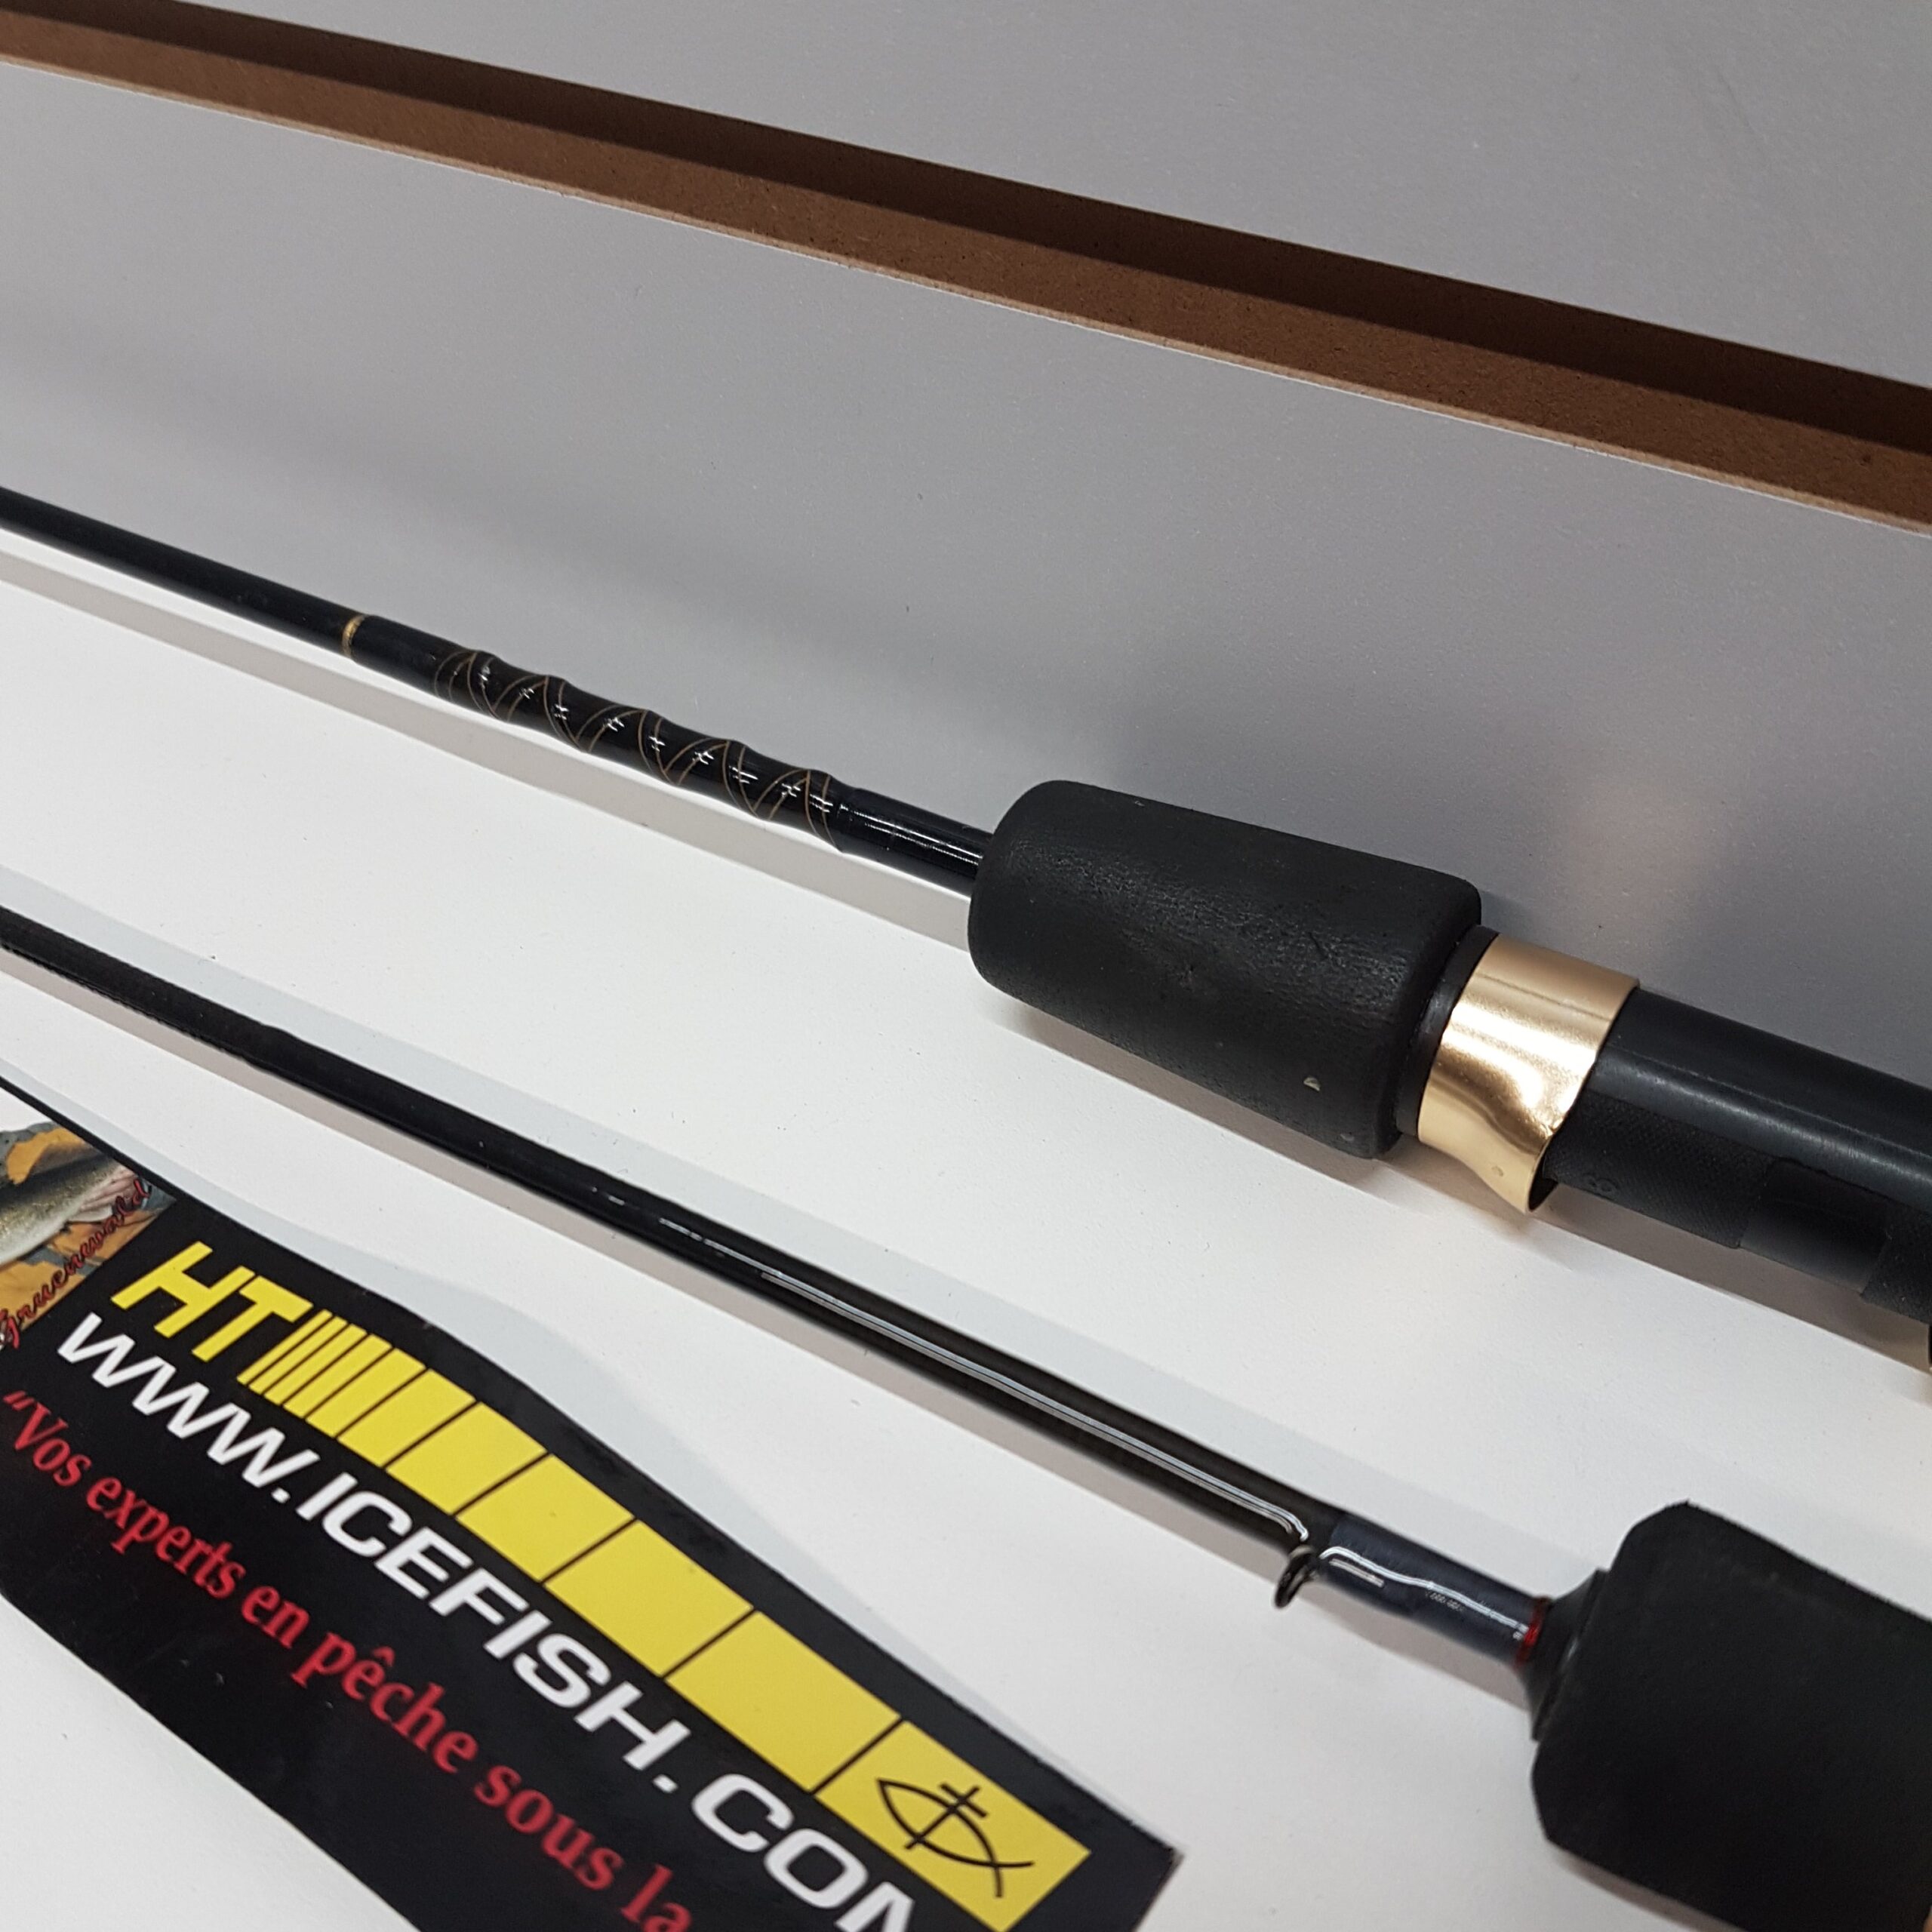 Only 12.00 usd for Ice Fishing Rods x 2 #10043200 Online at the Shop